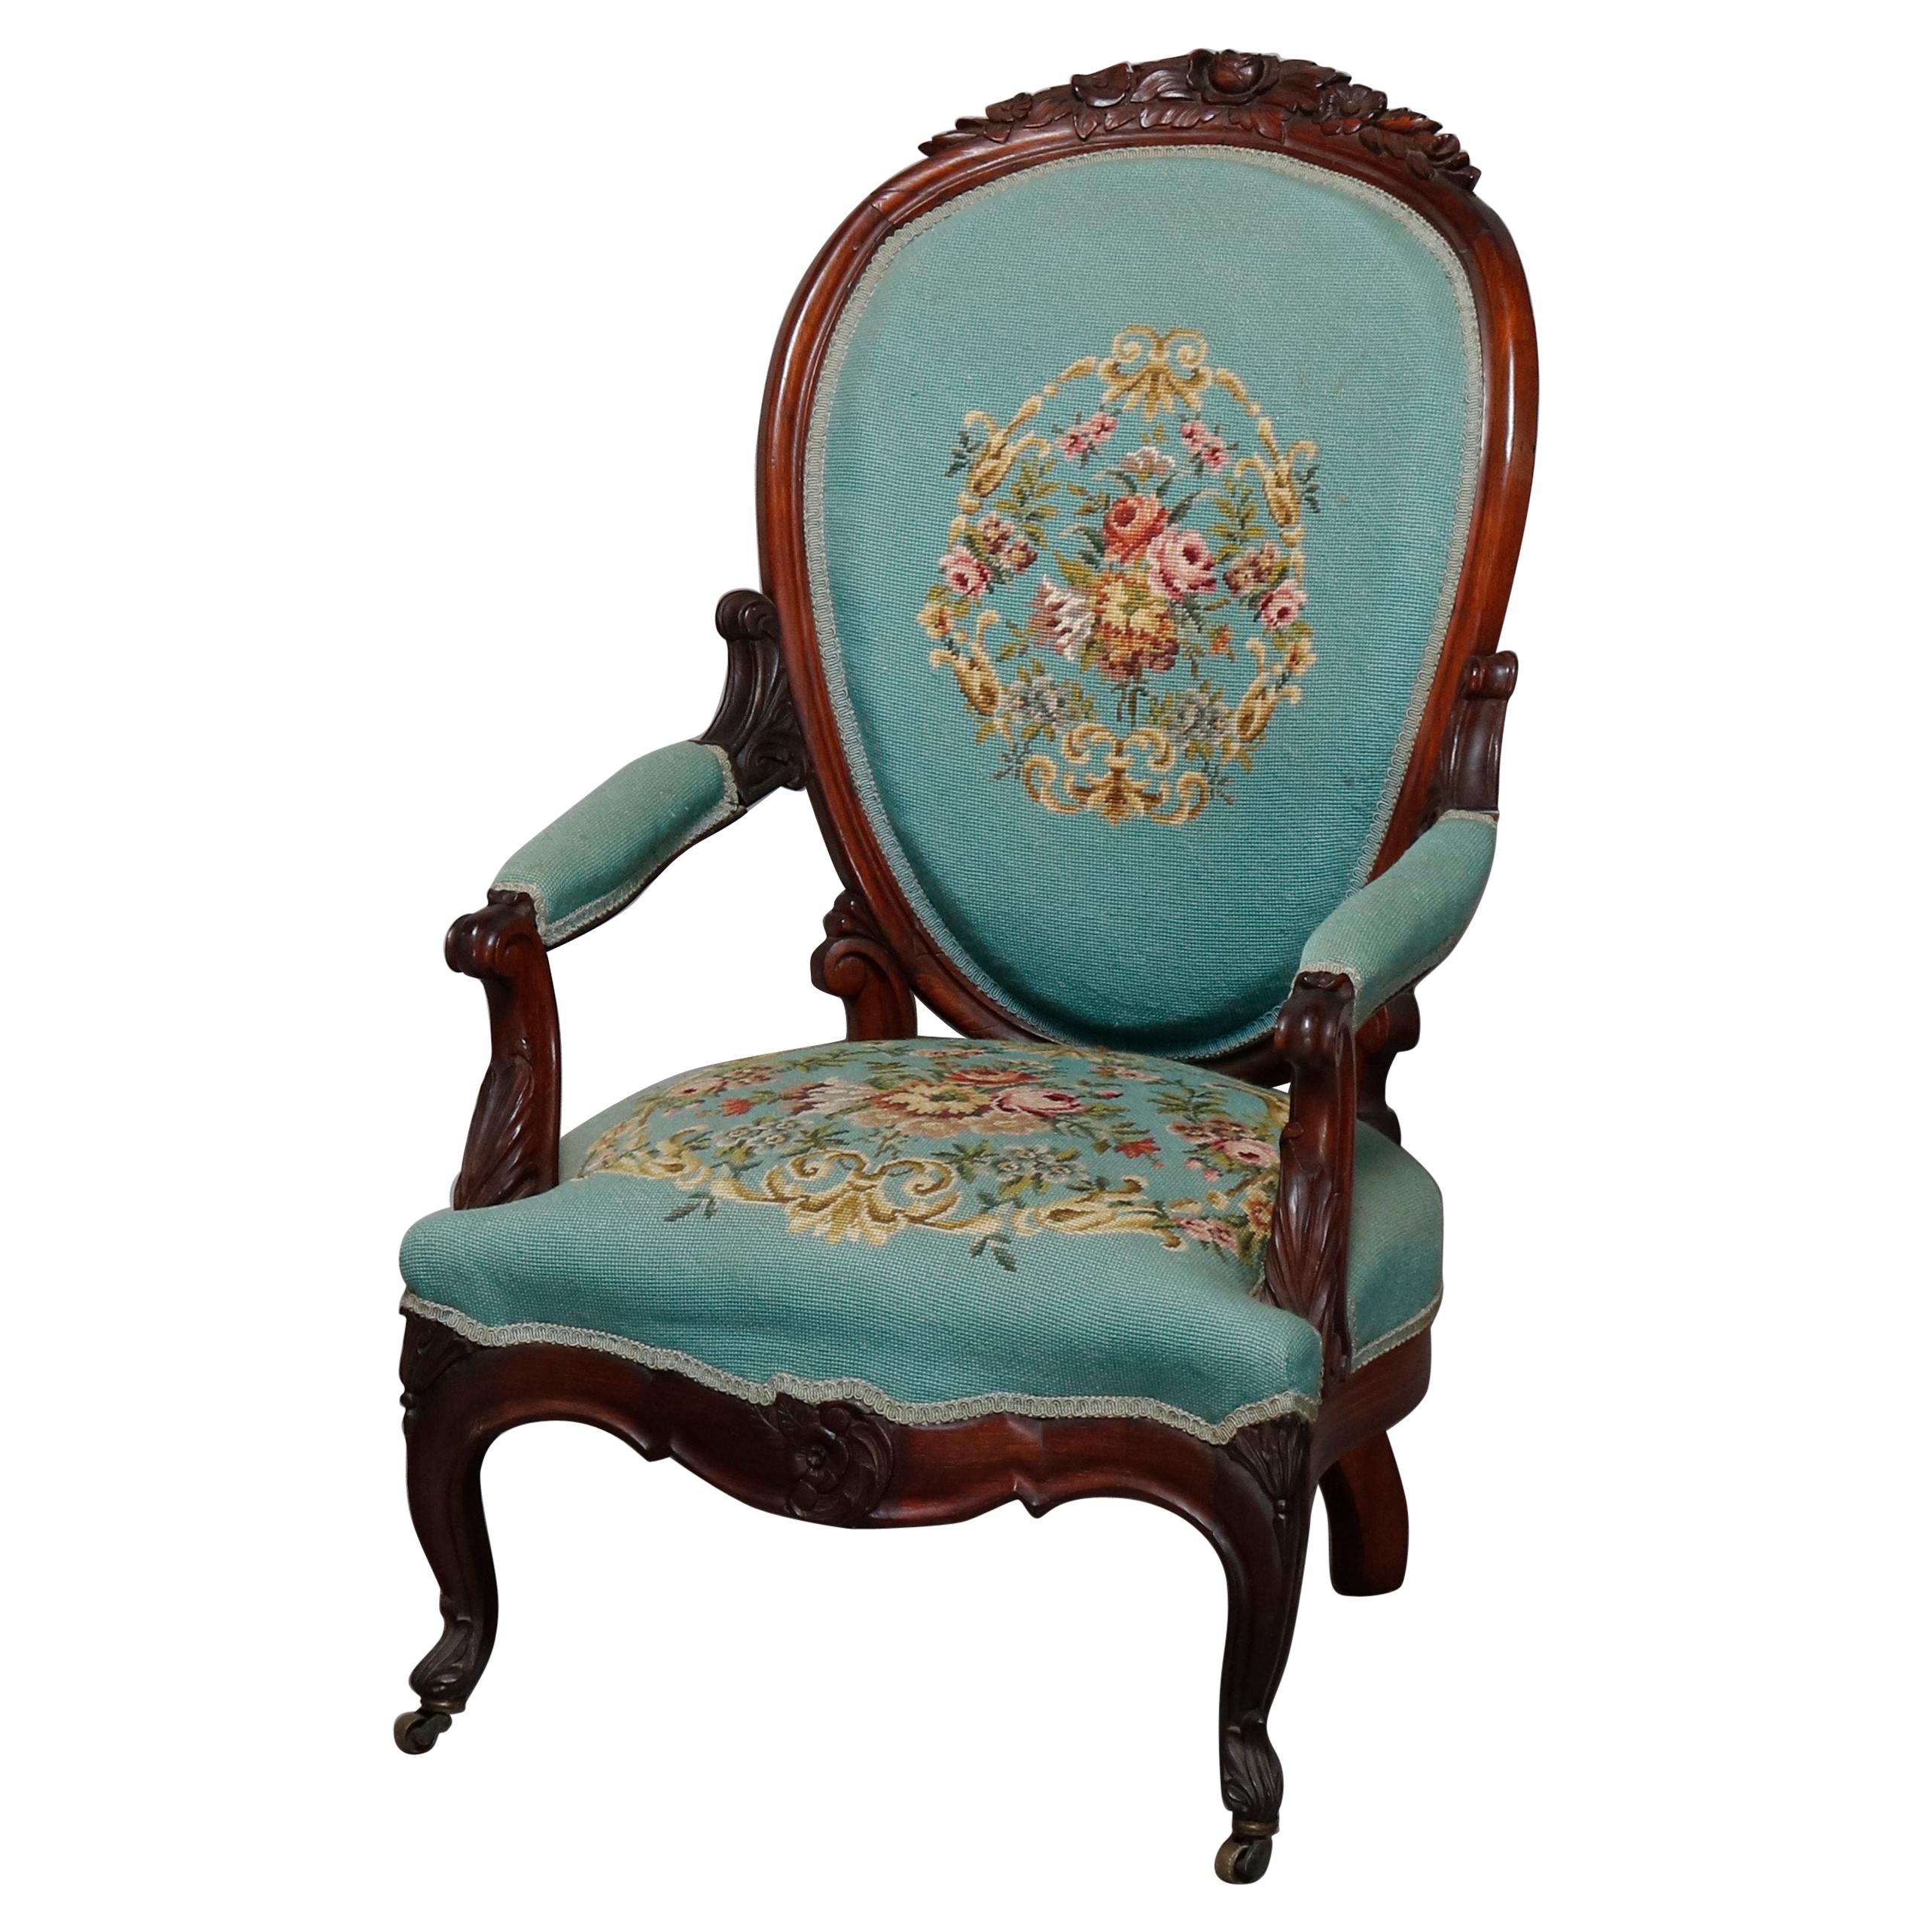 Antique Victorian Carved Walnut and Needlepoint Parlor Armchair, circa 1880